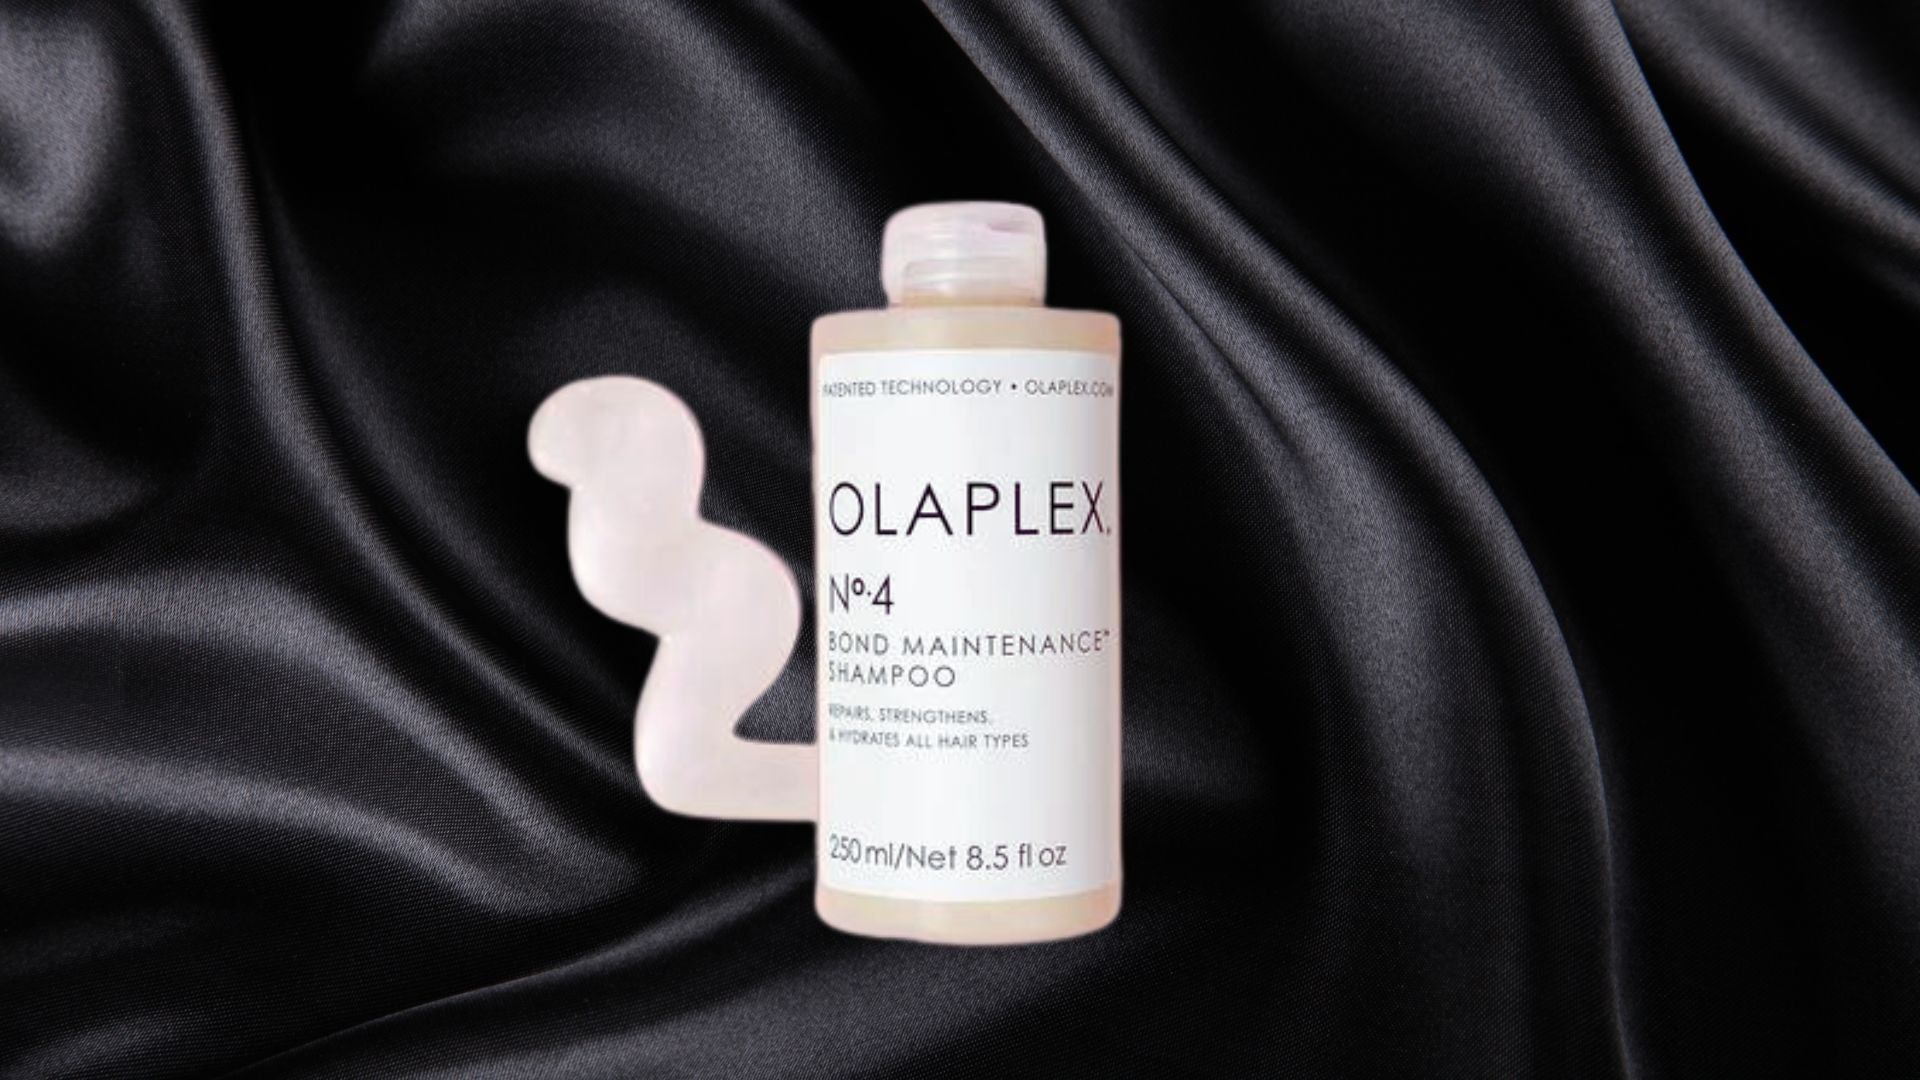 Don't Waste Your Money on Olaplex Hair Care Before Reading This